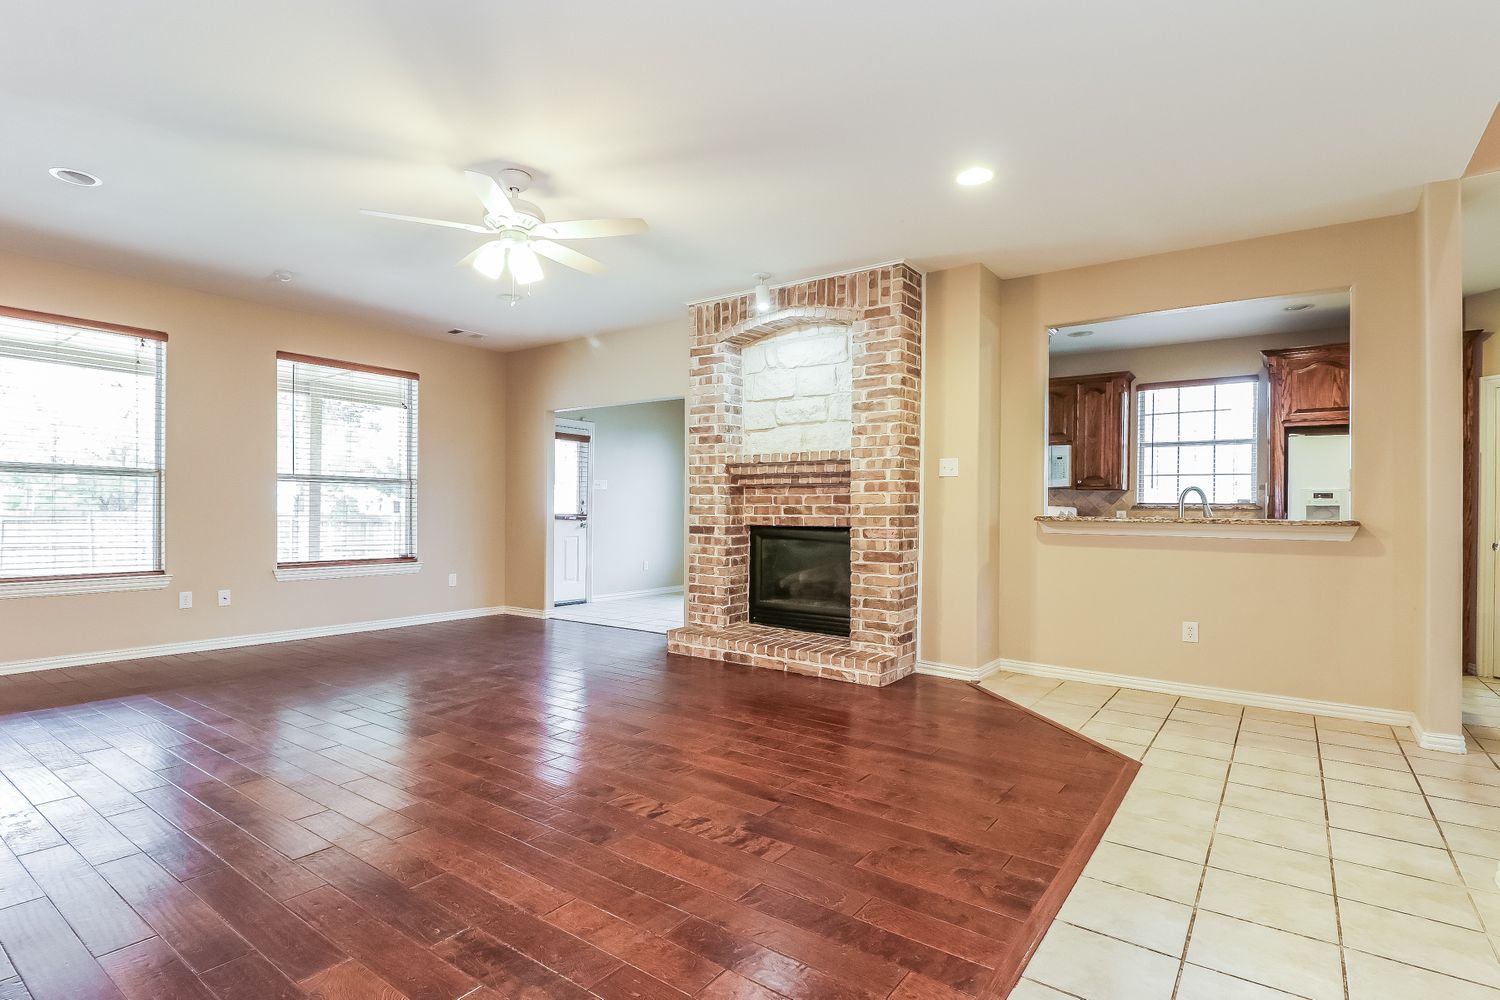 Family room with fireplace and wood flooring with window peering into kitchen at Invitation Homes Dallas.